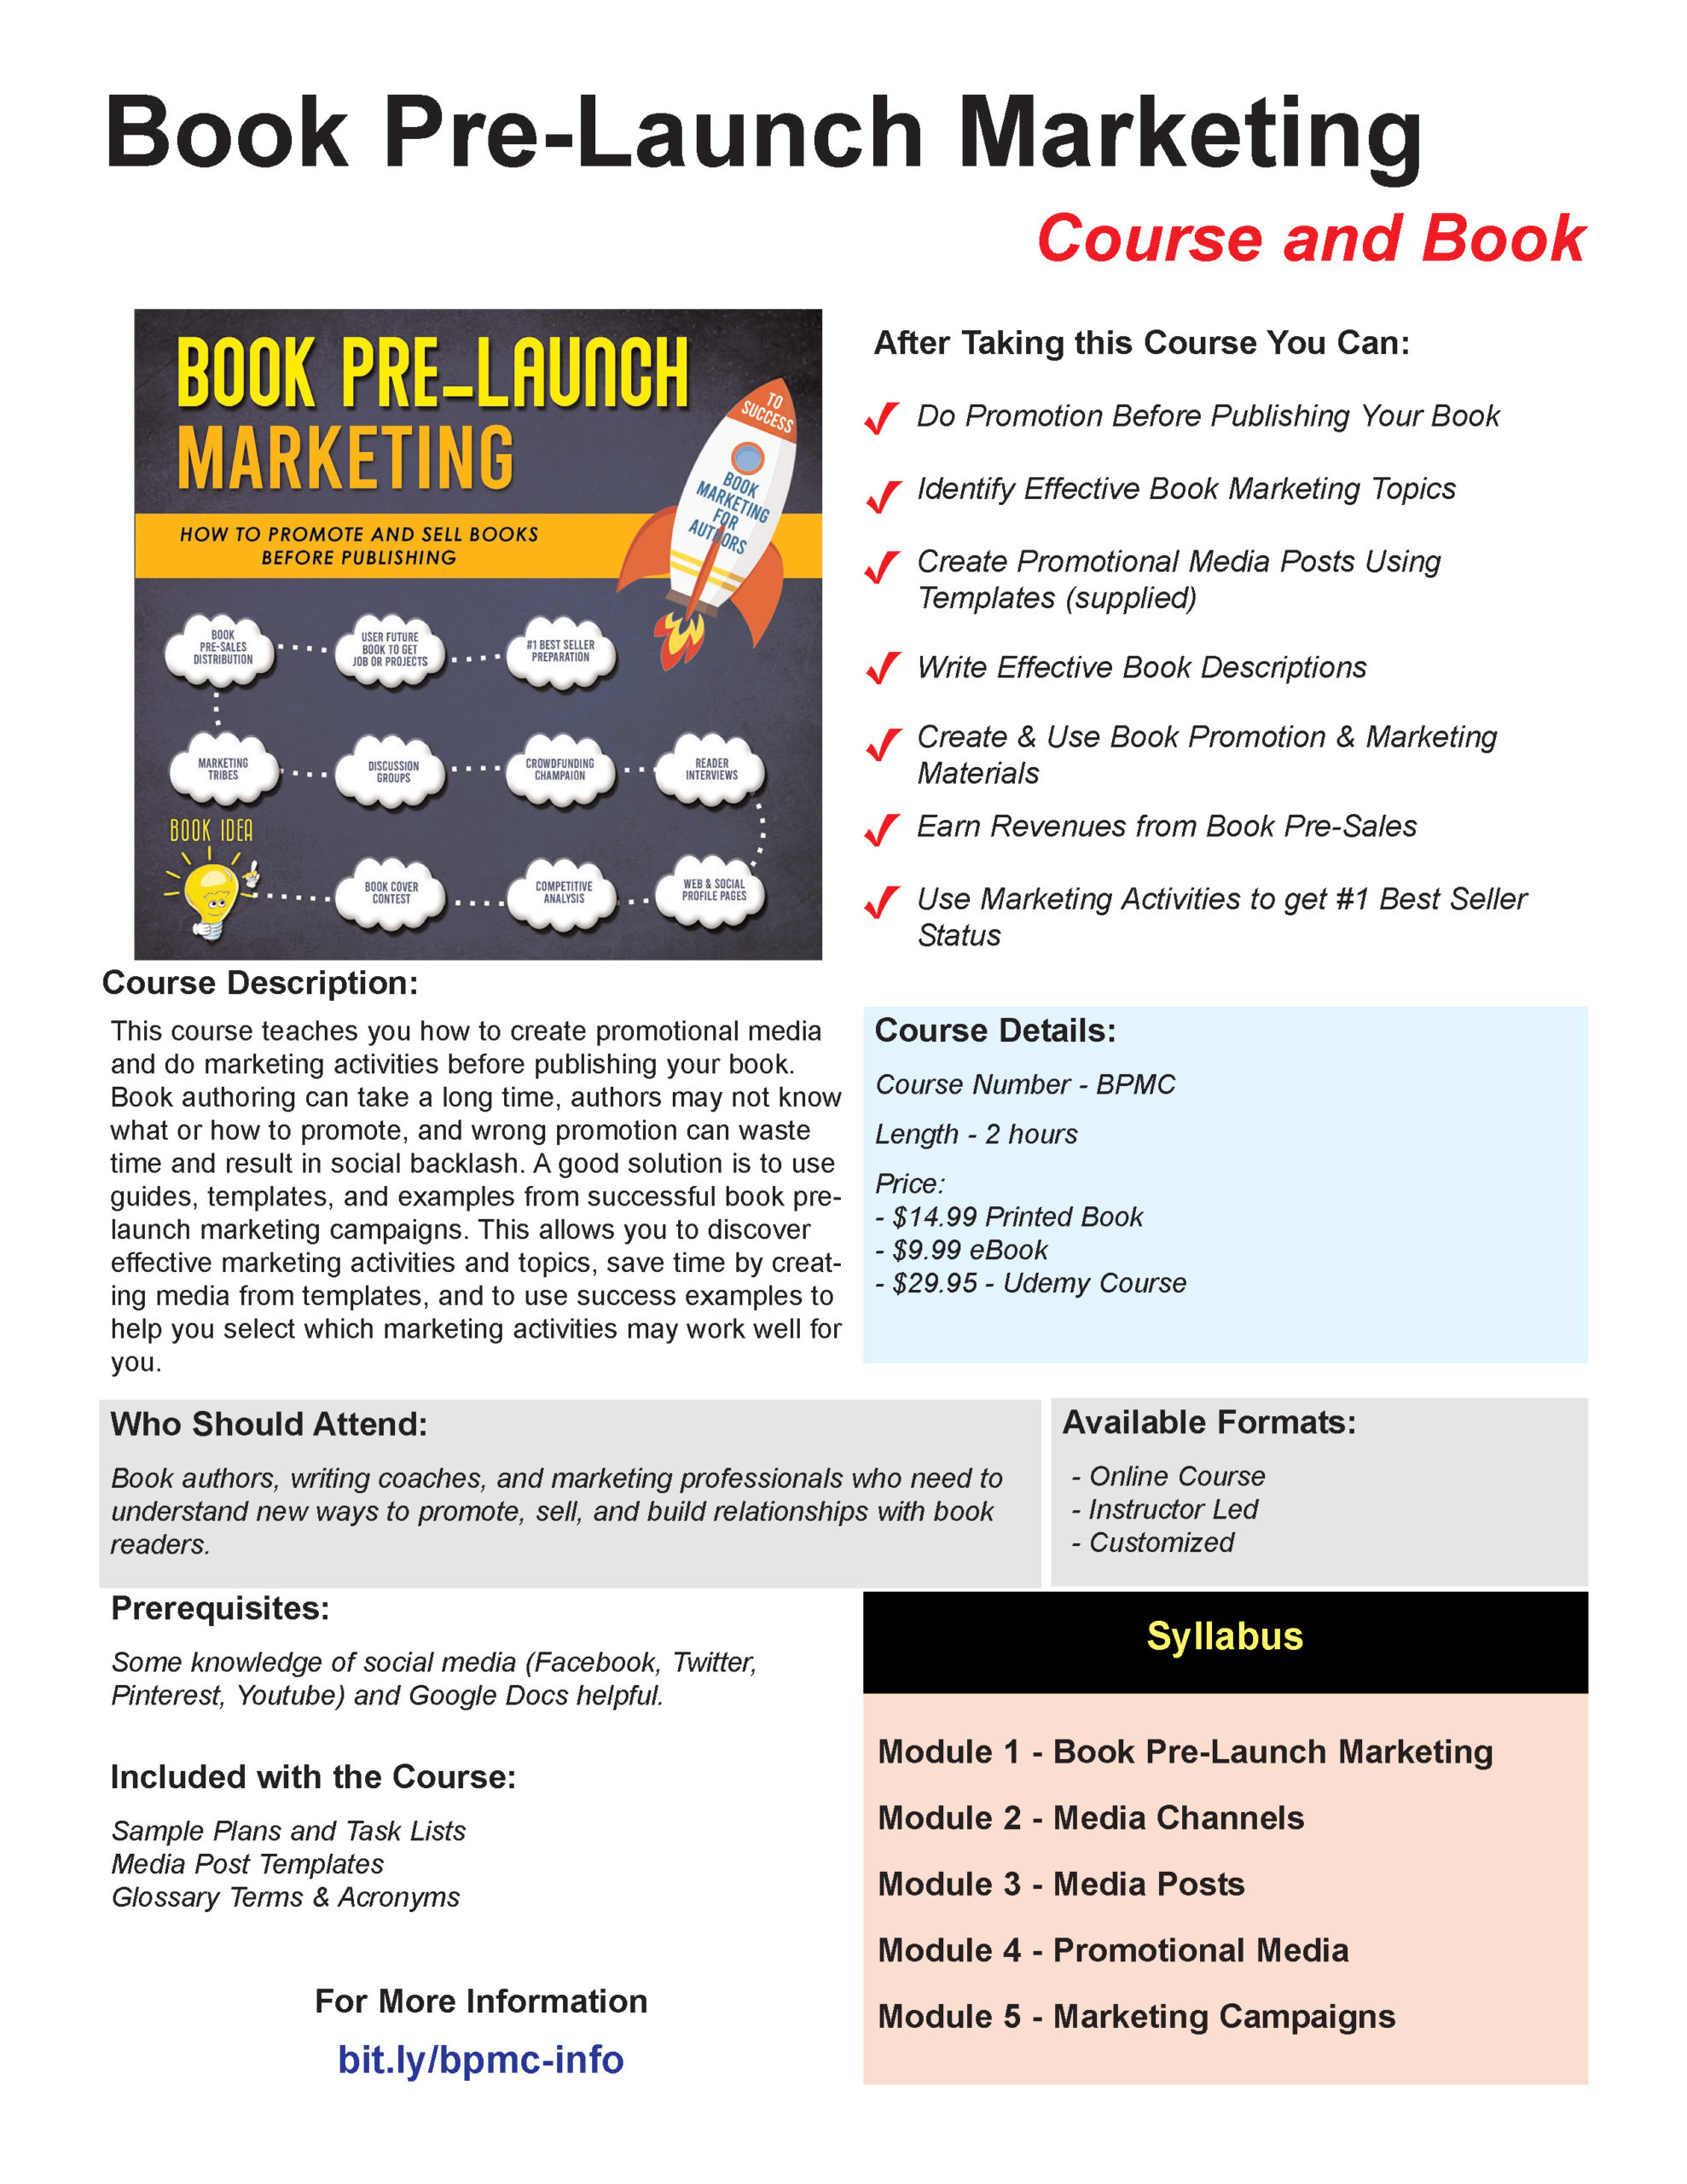 Book Pre-Launch Marketing Book and Course